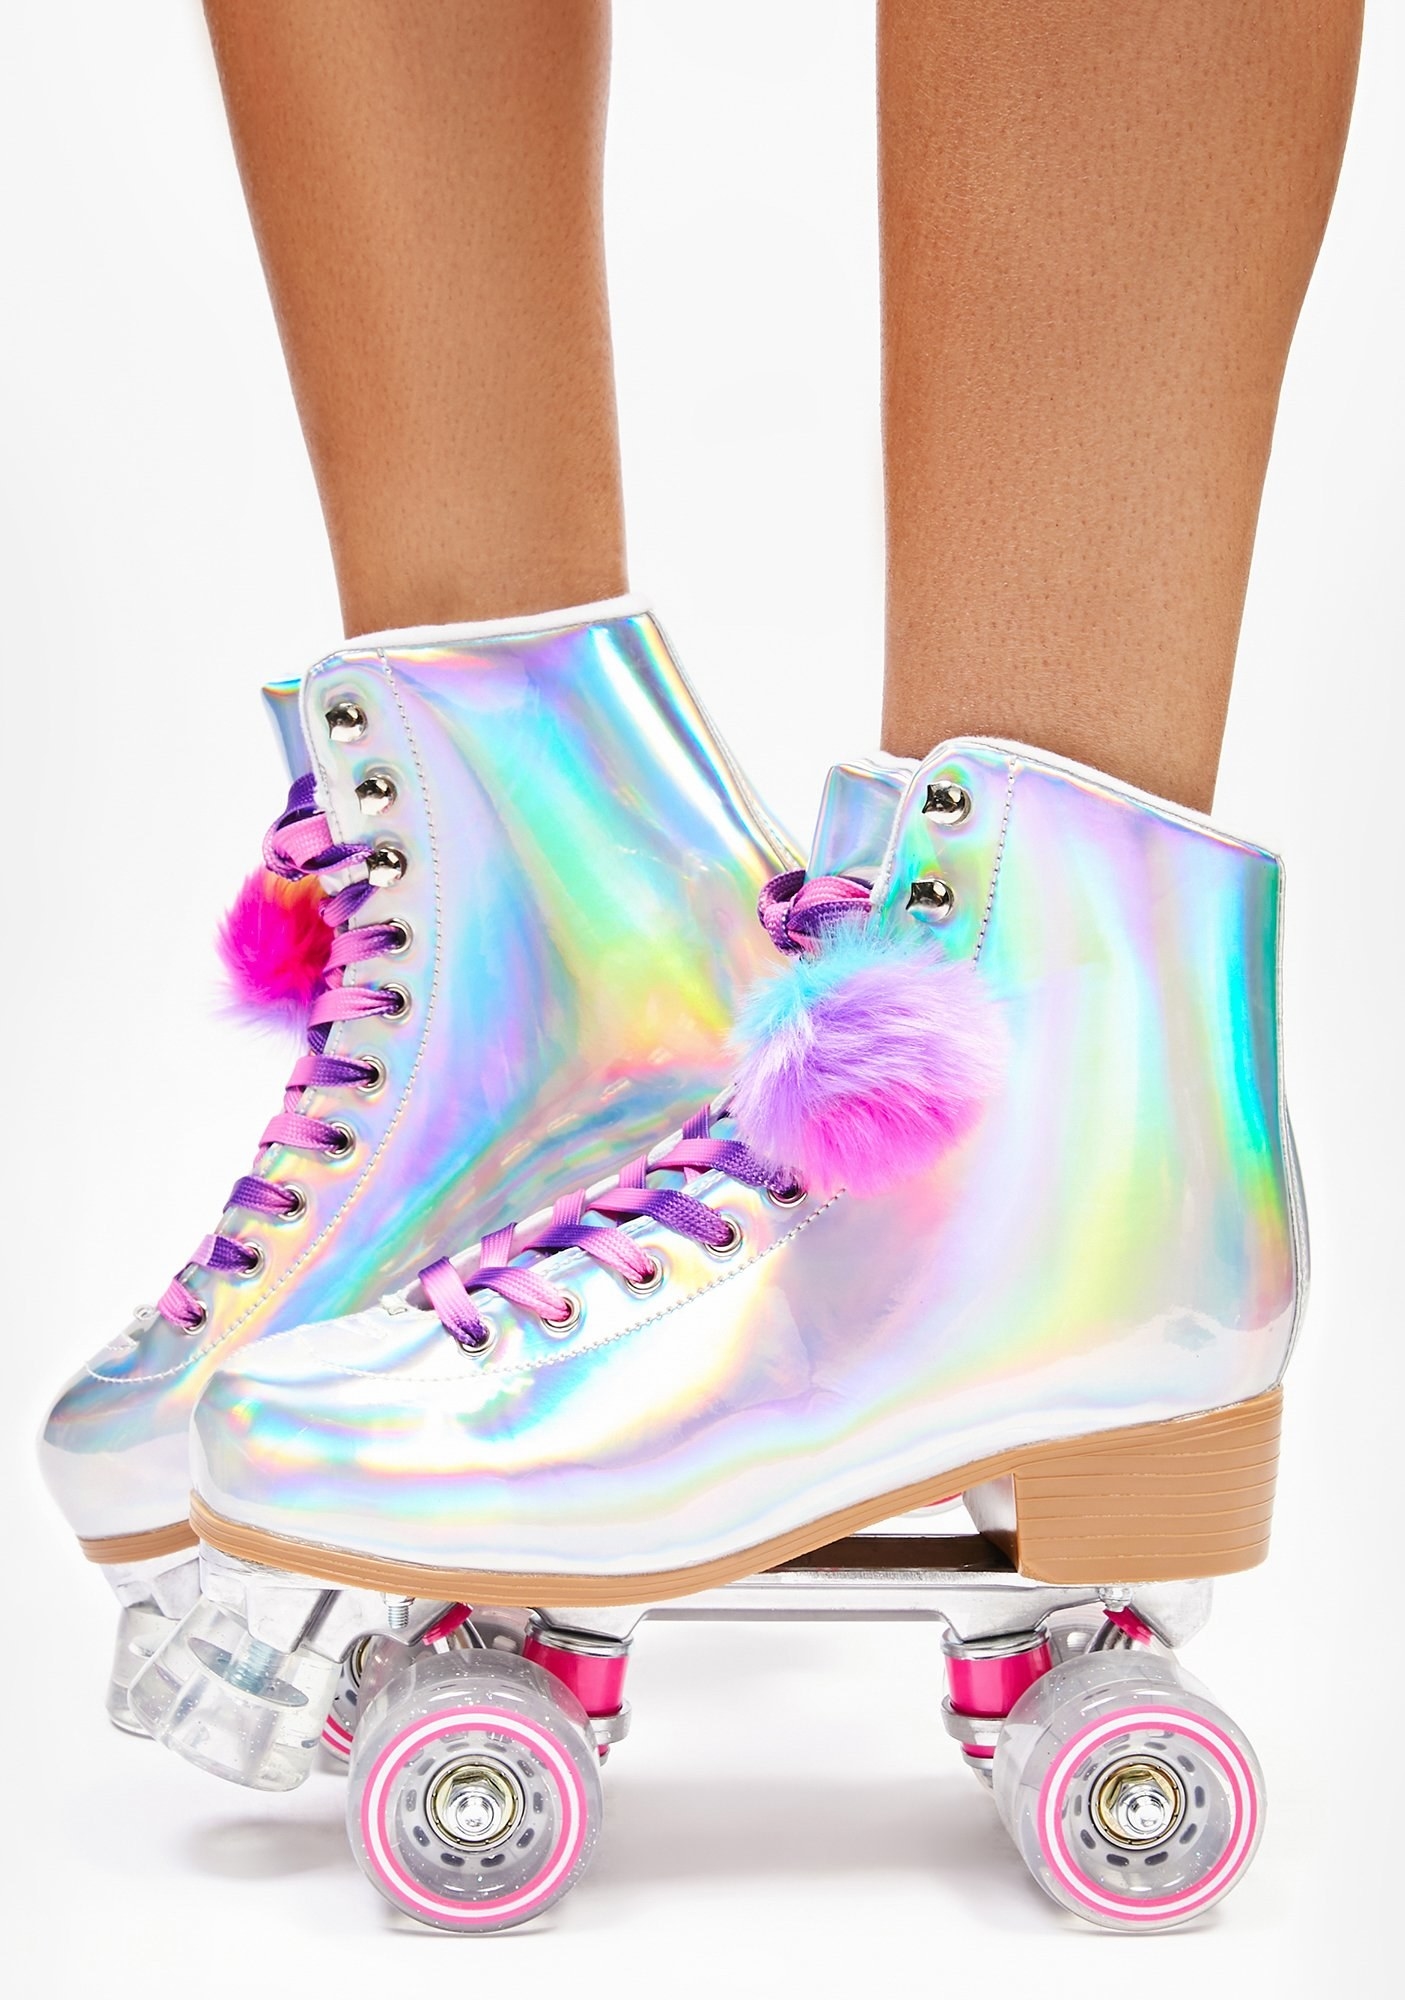 model wearing rainbow holographic skates with pom pom details